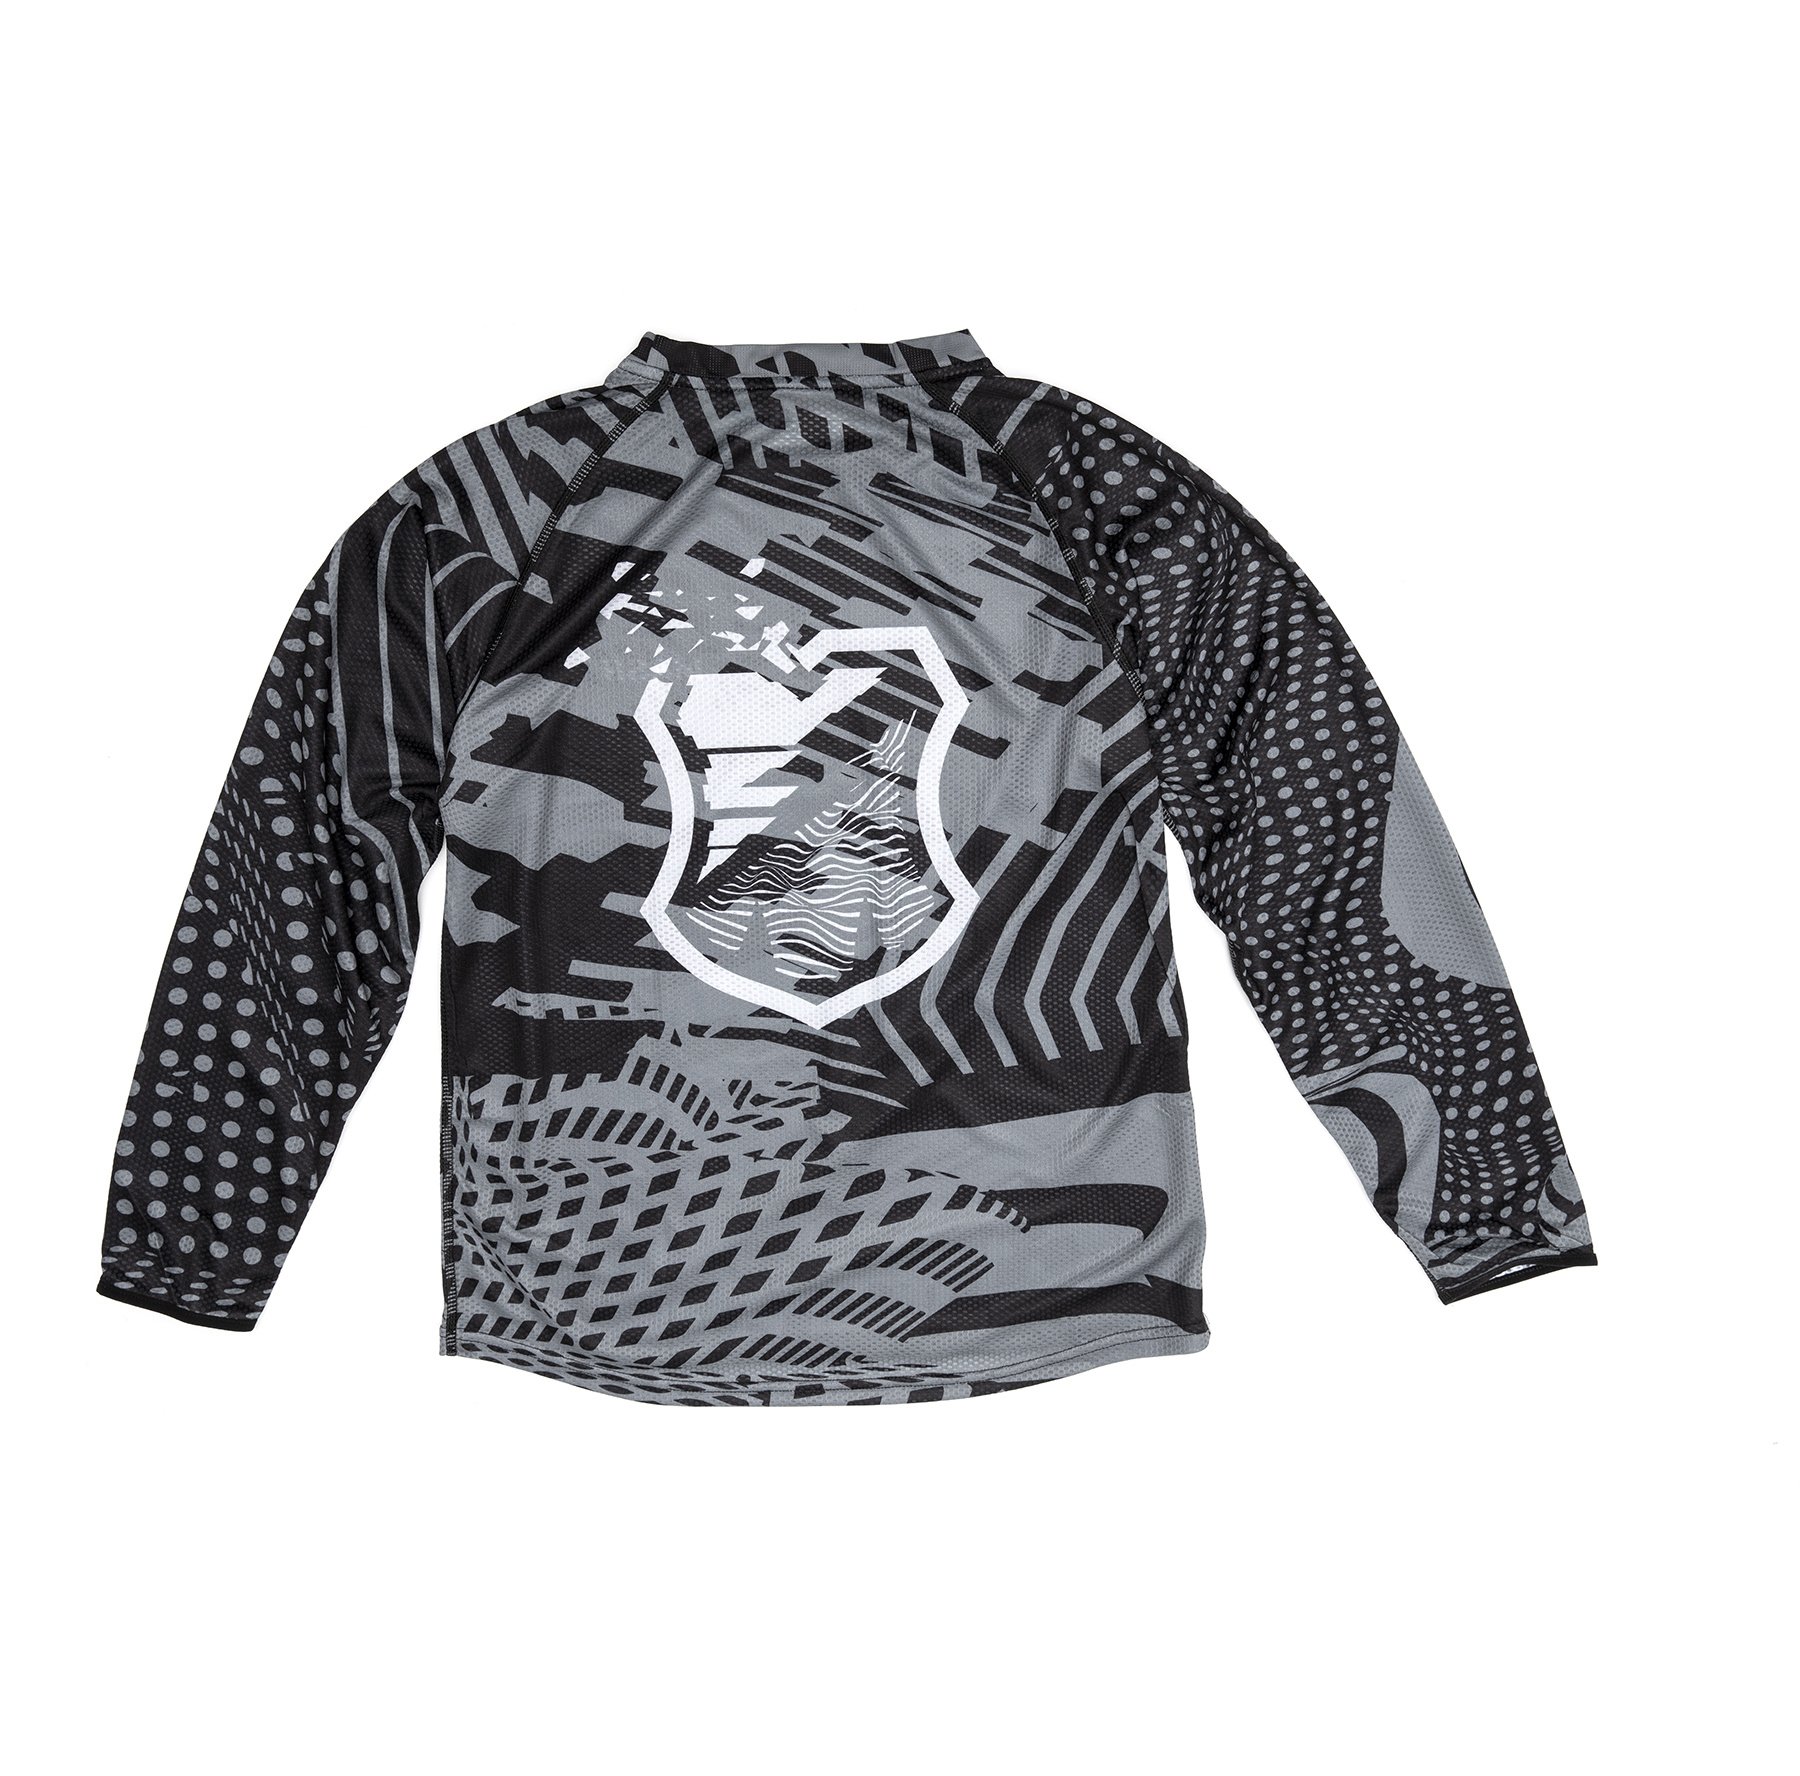 MASH Noise L/S Jersey Grayscale